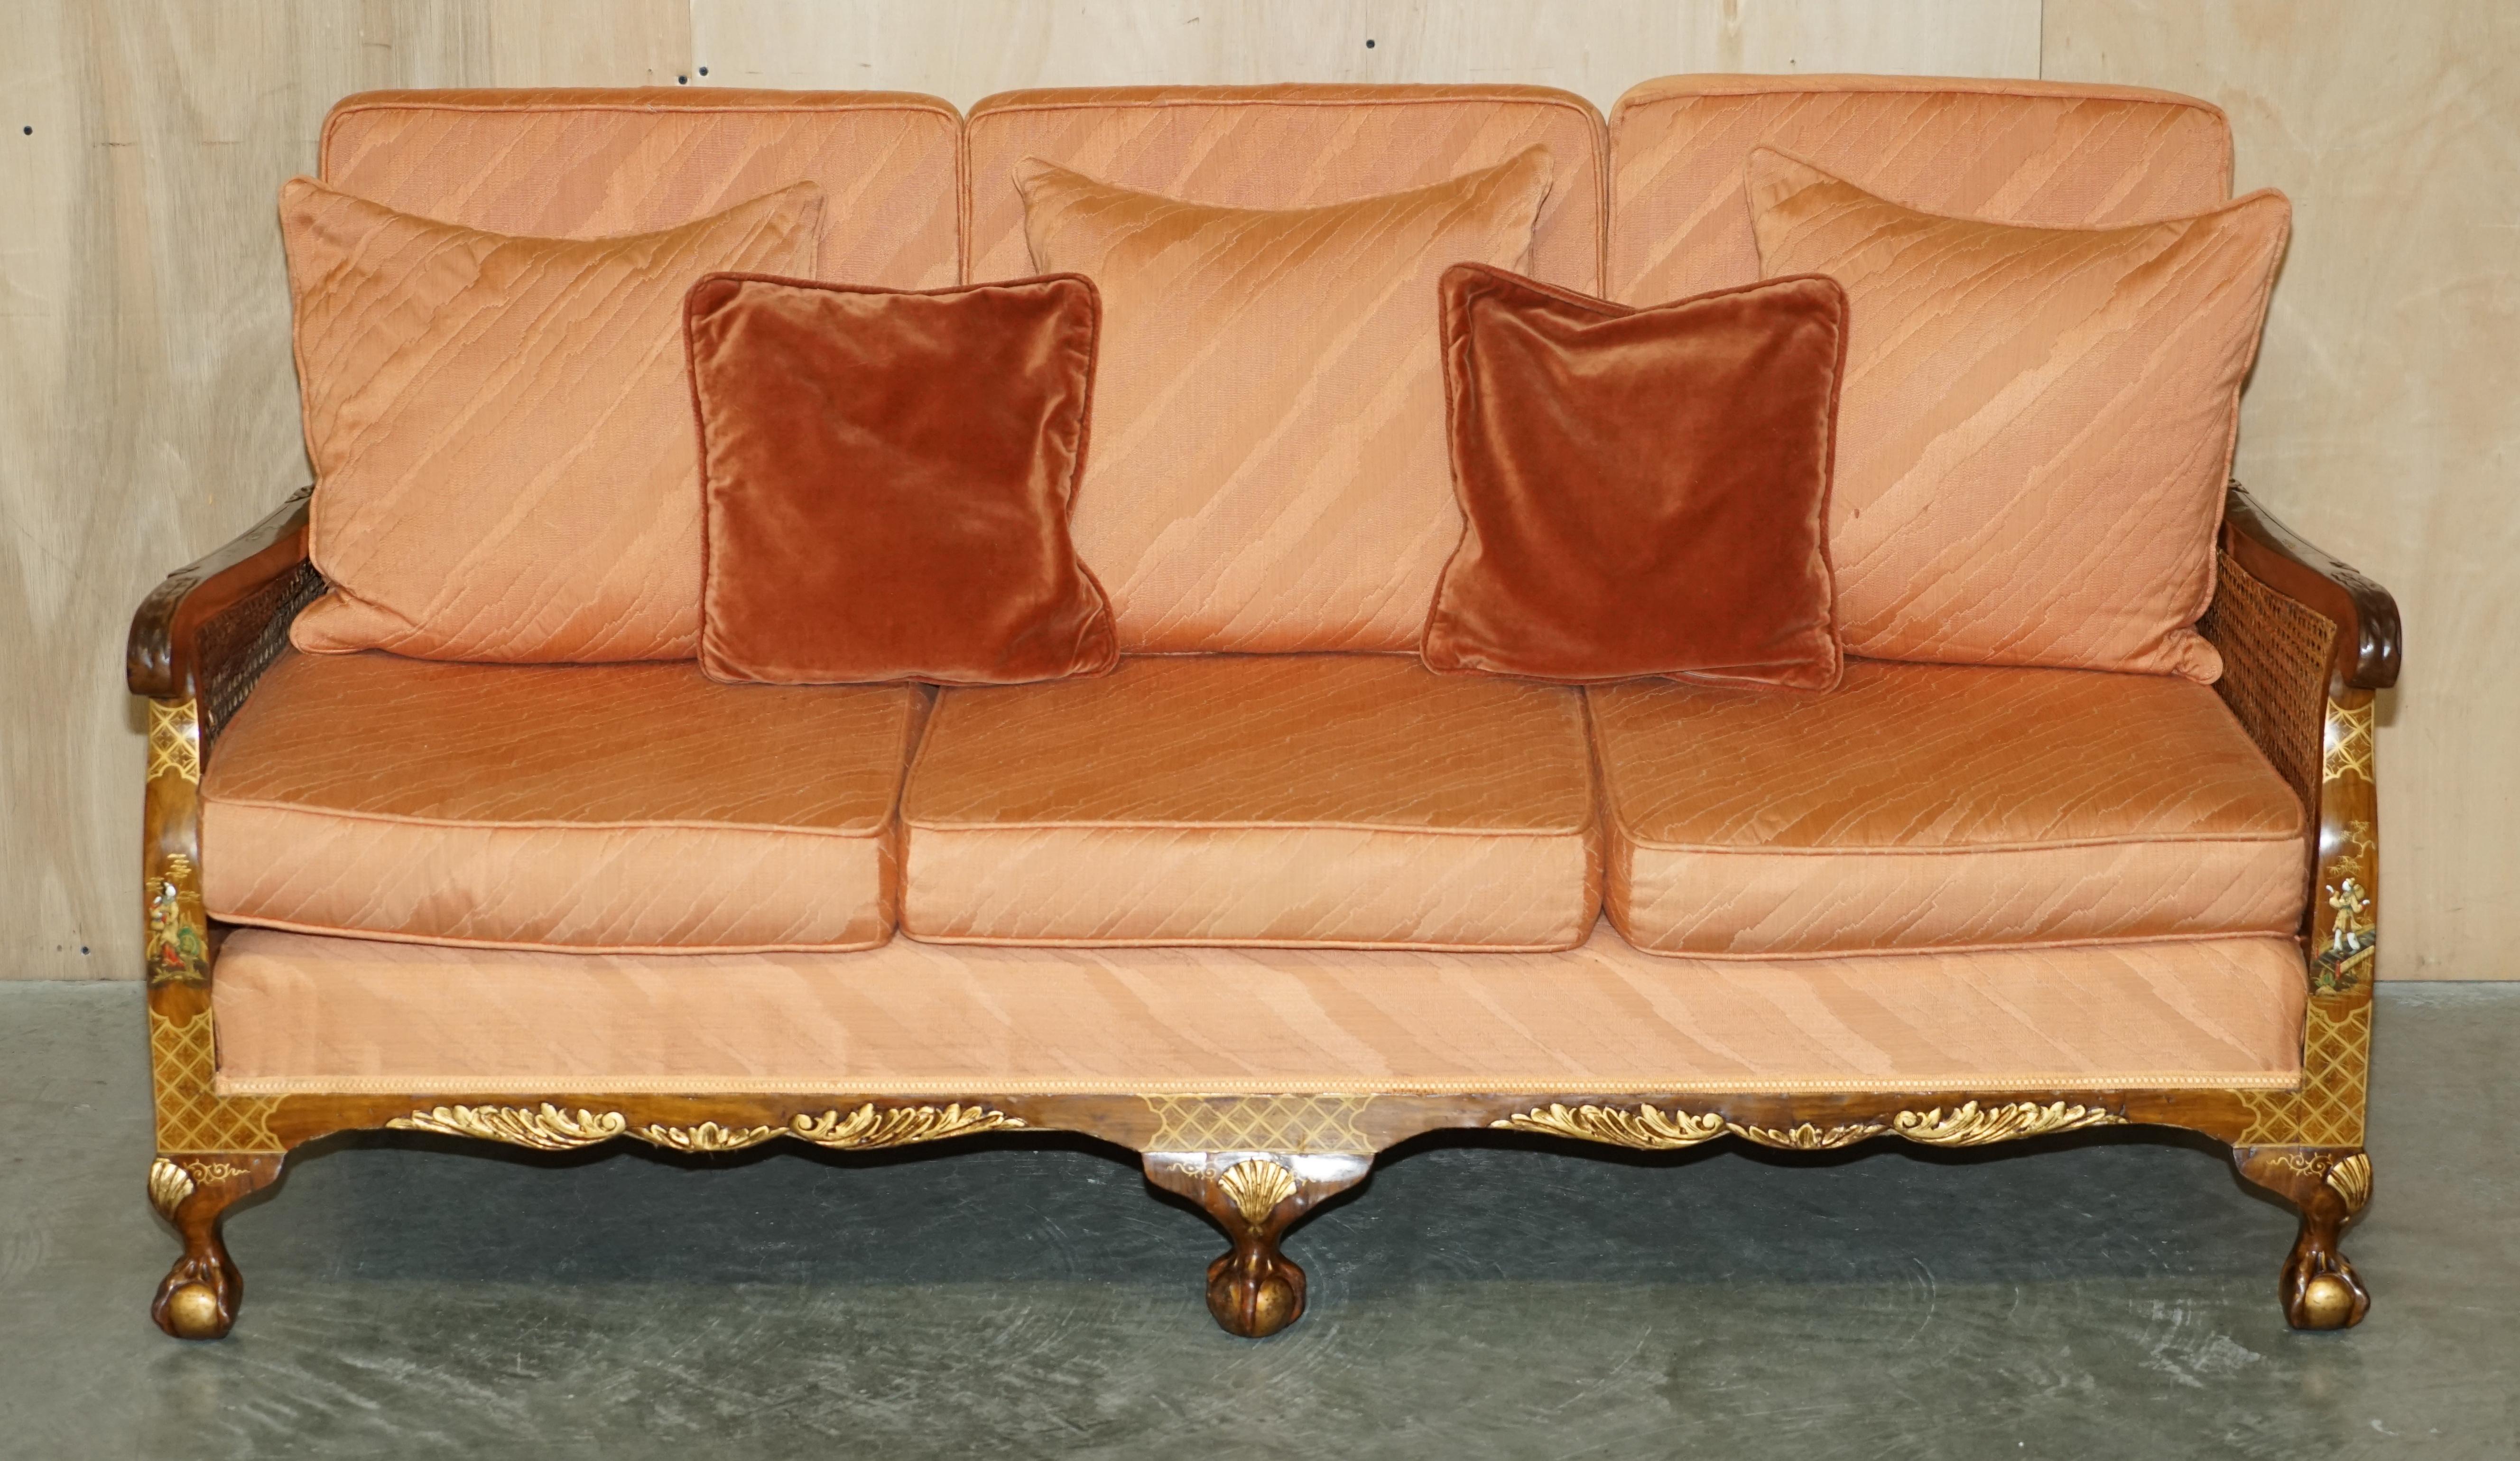 Chinese 1920's WALNUT & CHINOISERIE 3 PIECE BERGERE SOFA ARMCHAIR SUITE FOR RESTORATION For Sale